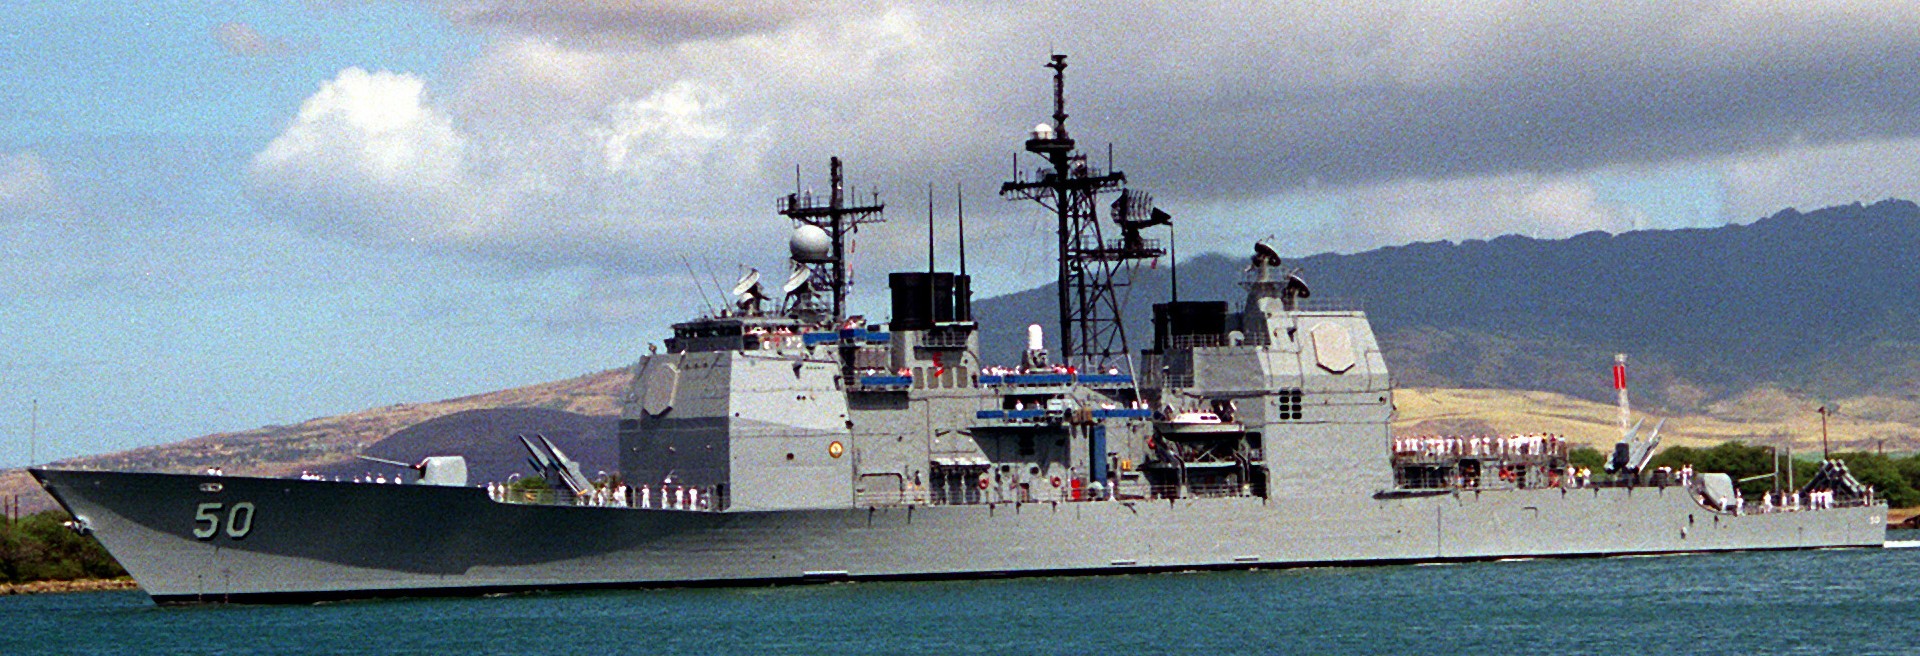 cg-50 uss valley forge ticonderoga class guided missile cruiser aegis us navy pearl harbor hawaii 49